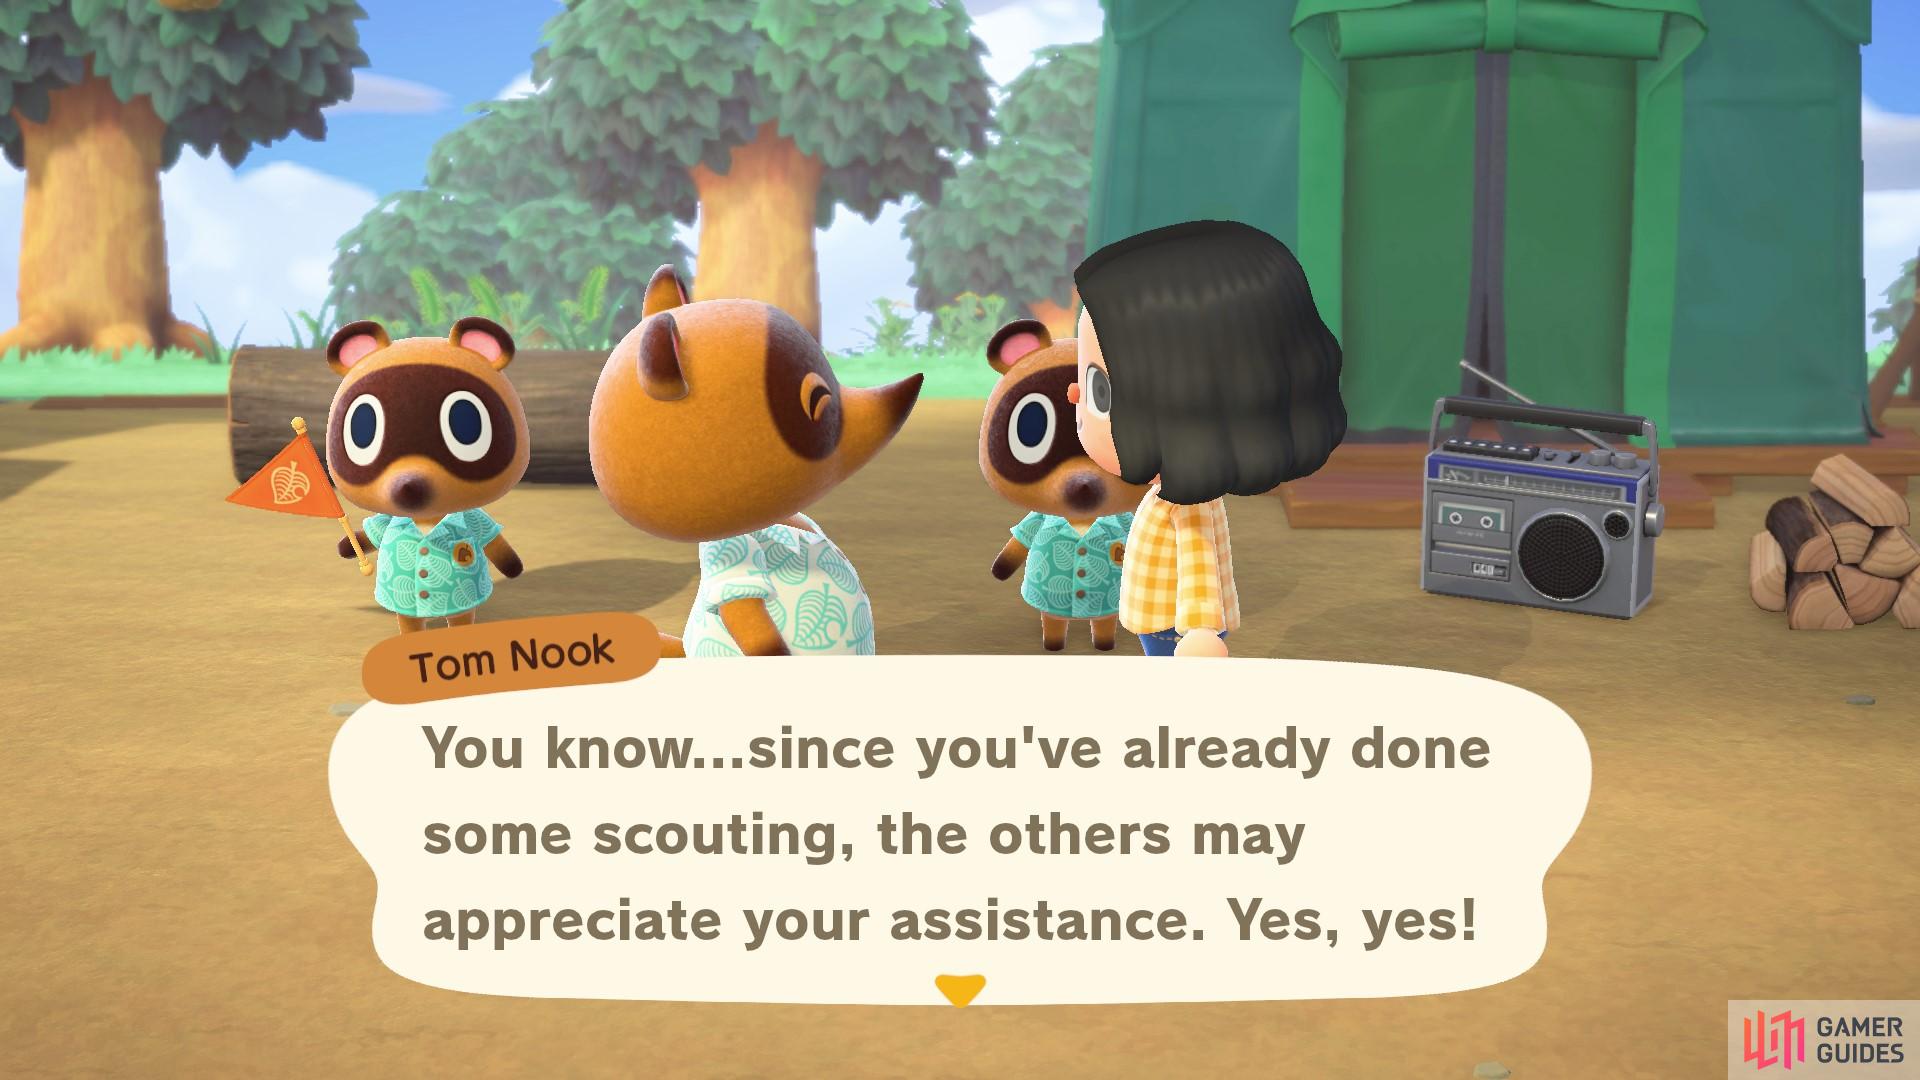 Tom Nook thinks that the other villagers could use your help in picking the perfect locations for their tents, too.